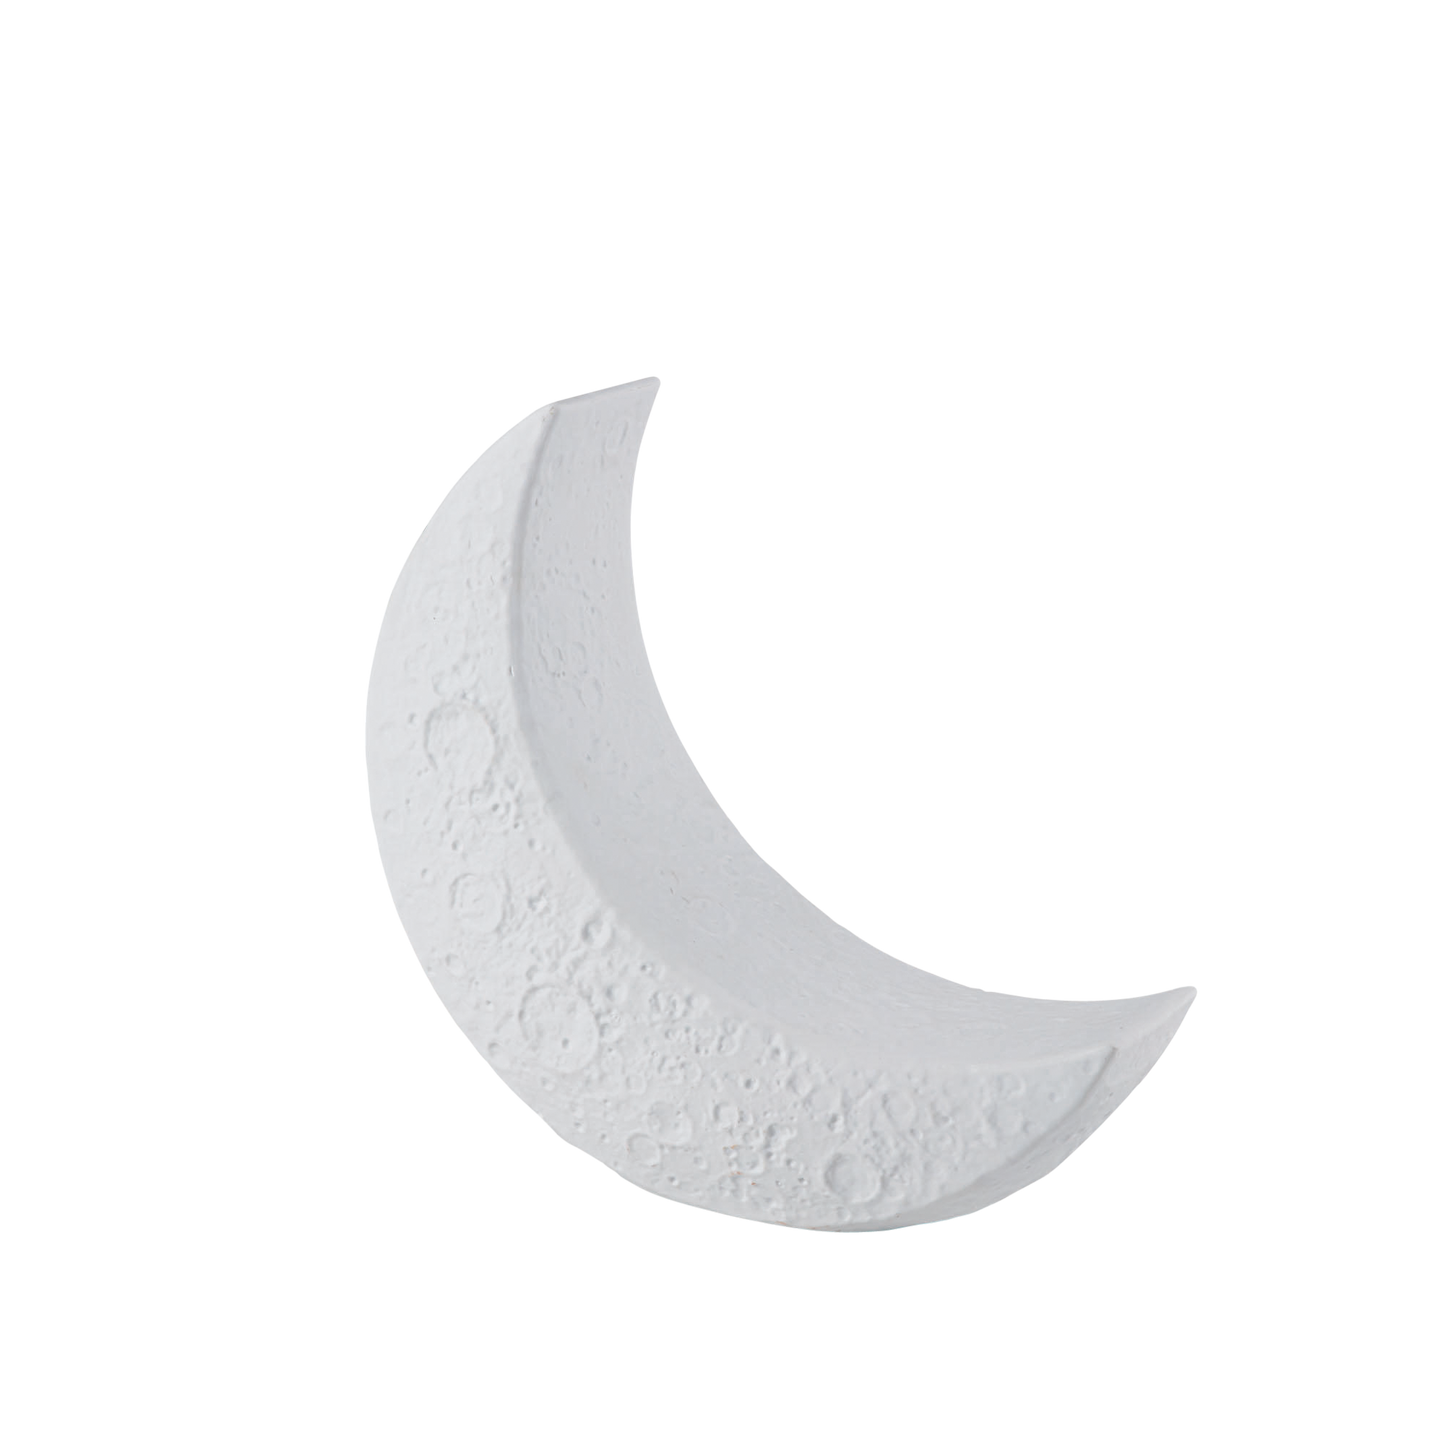 My Tiny Moon Table Lamp by Seletti #White